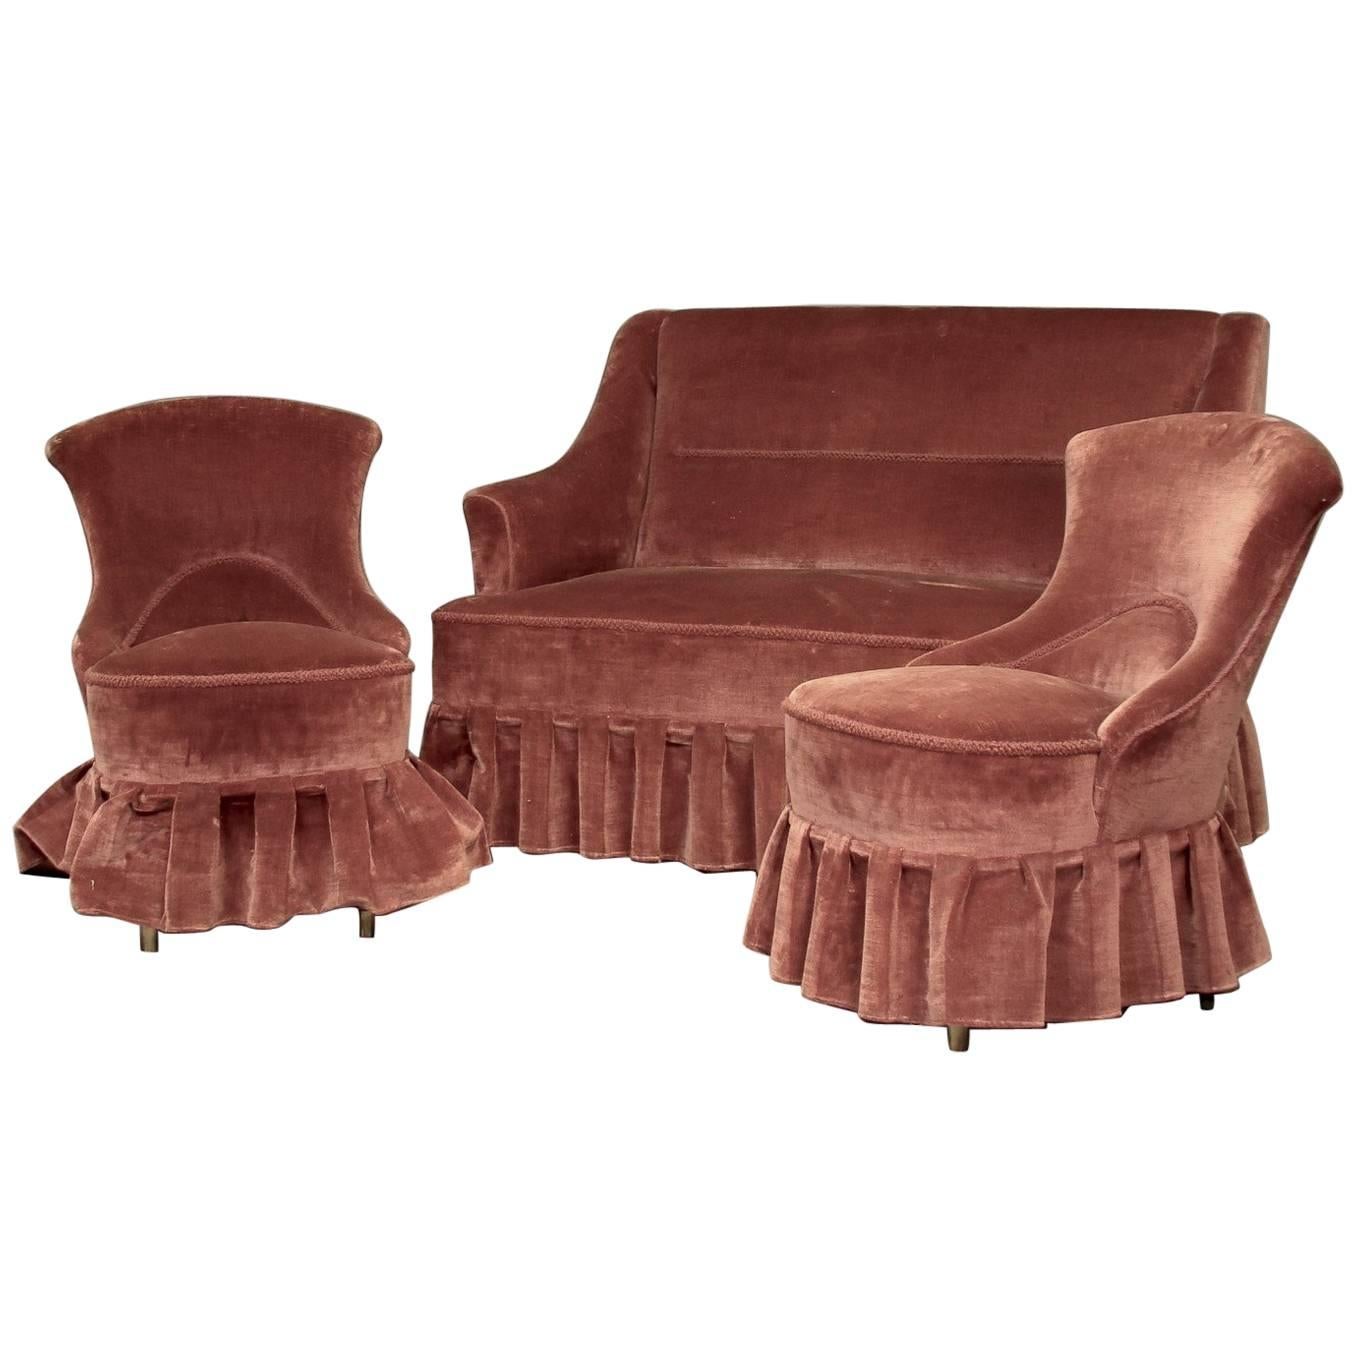 Danish 1930s Small-Scale Salon Set of Loveseat and Chairs